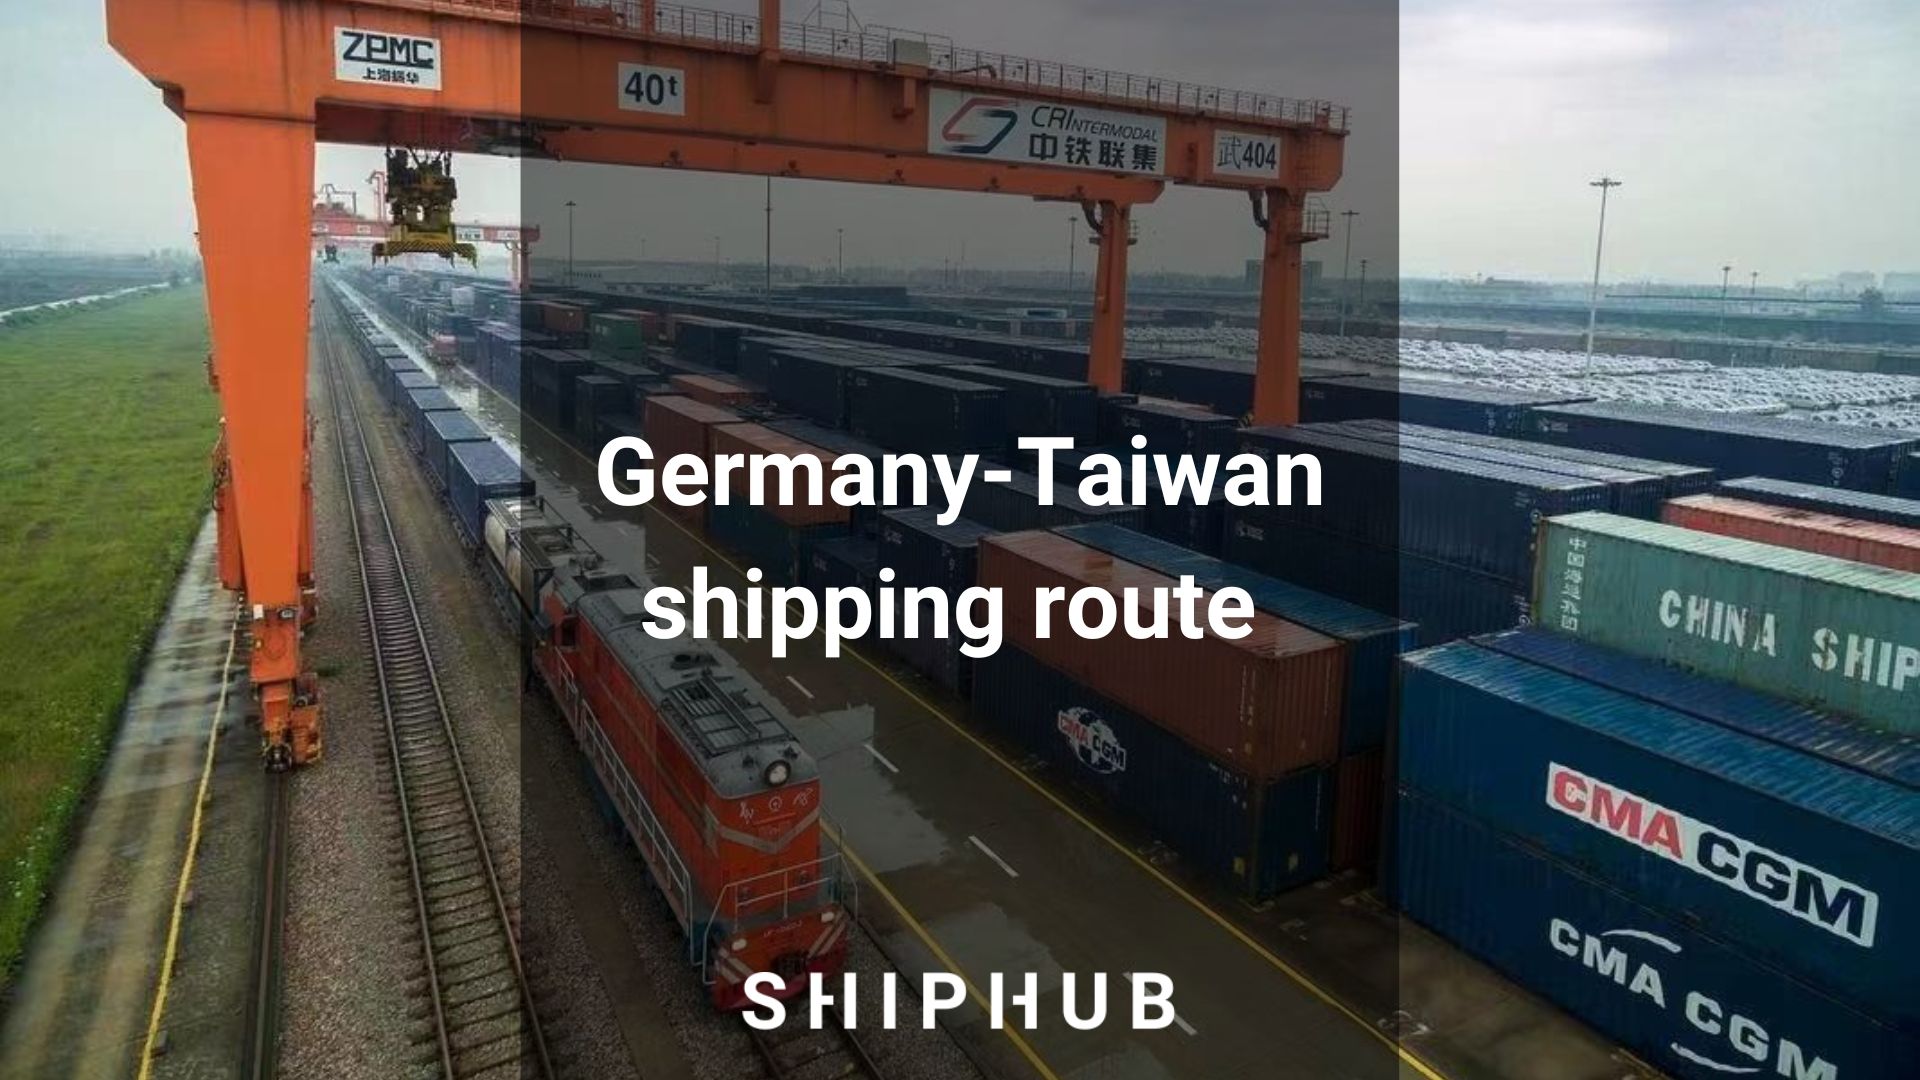 Germany-Taiwan shipping route